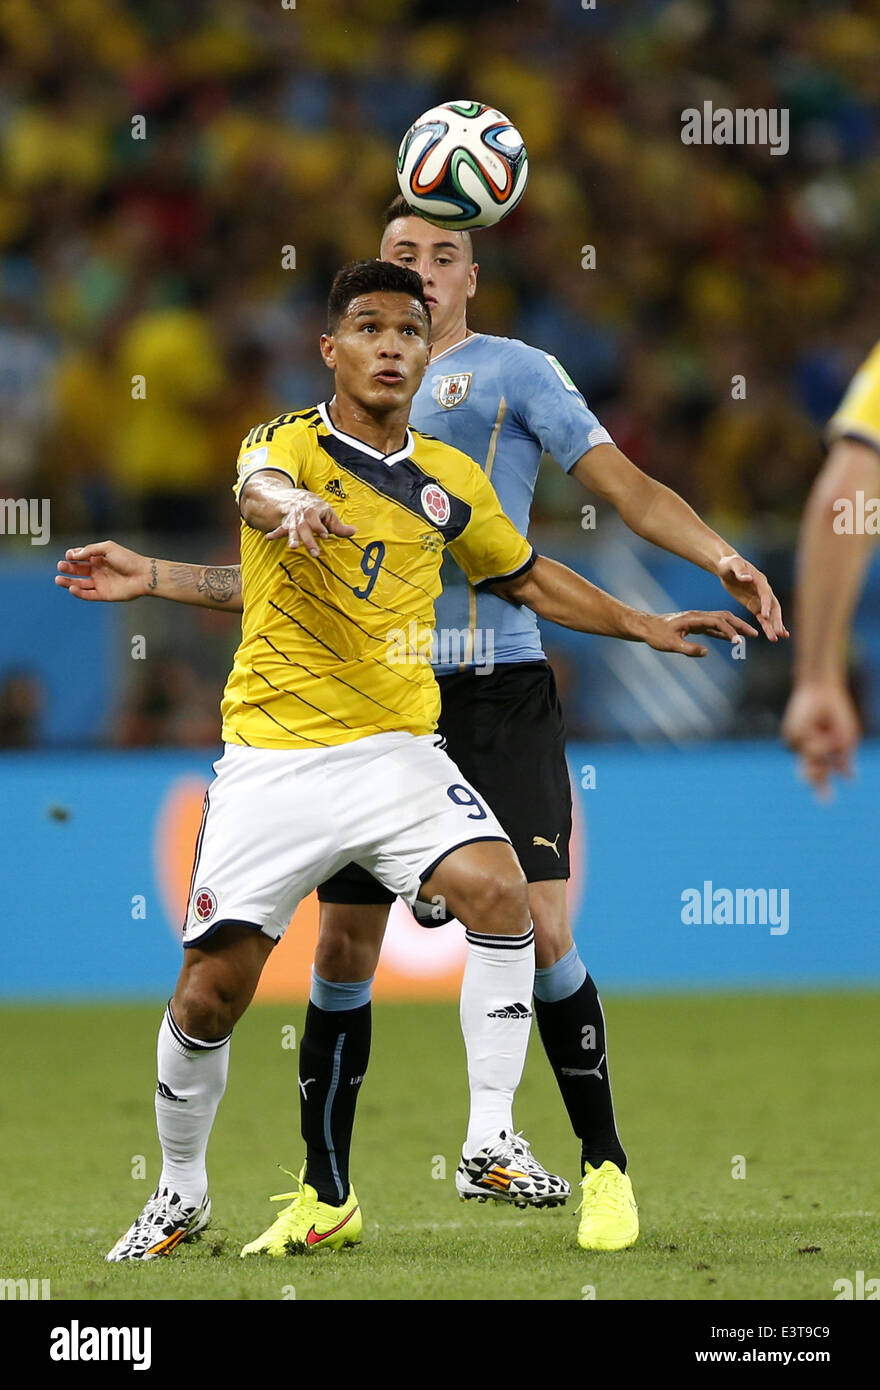 Rio De Janeiro, Brazil. 28th June, 2014. Colombia's Teofilo Gutierrez (front) competes during a Round of 16 match between Colombia and Uruguay of 2014 FIFA World Cup at the Estadio do Maracana Stadium in Rio de Janeiro, Brazil, on June 28, 2014. Colombia won 2-0 over Uruguay and qualified for Quarter-finals on Saturday. Credit:  Wang Lili/Xinhua/Alamy Live News Stock Photo